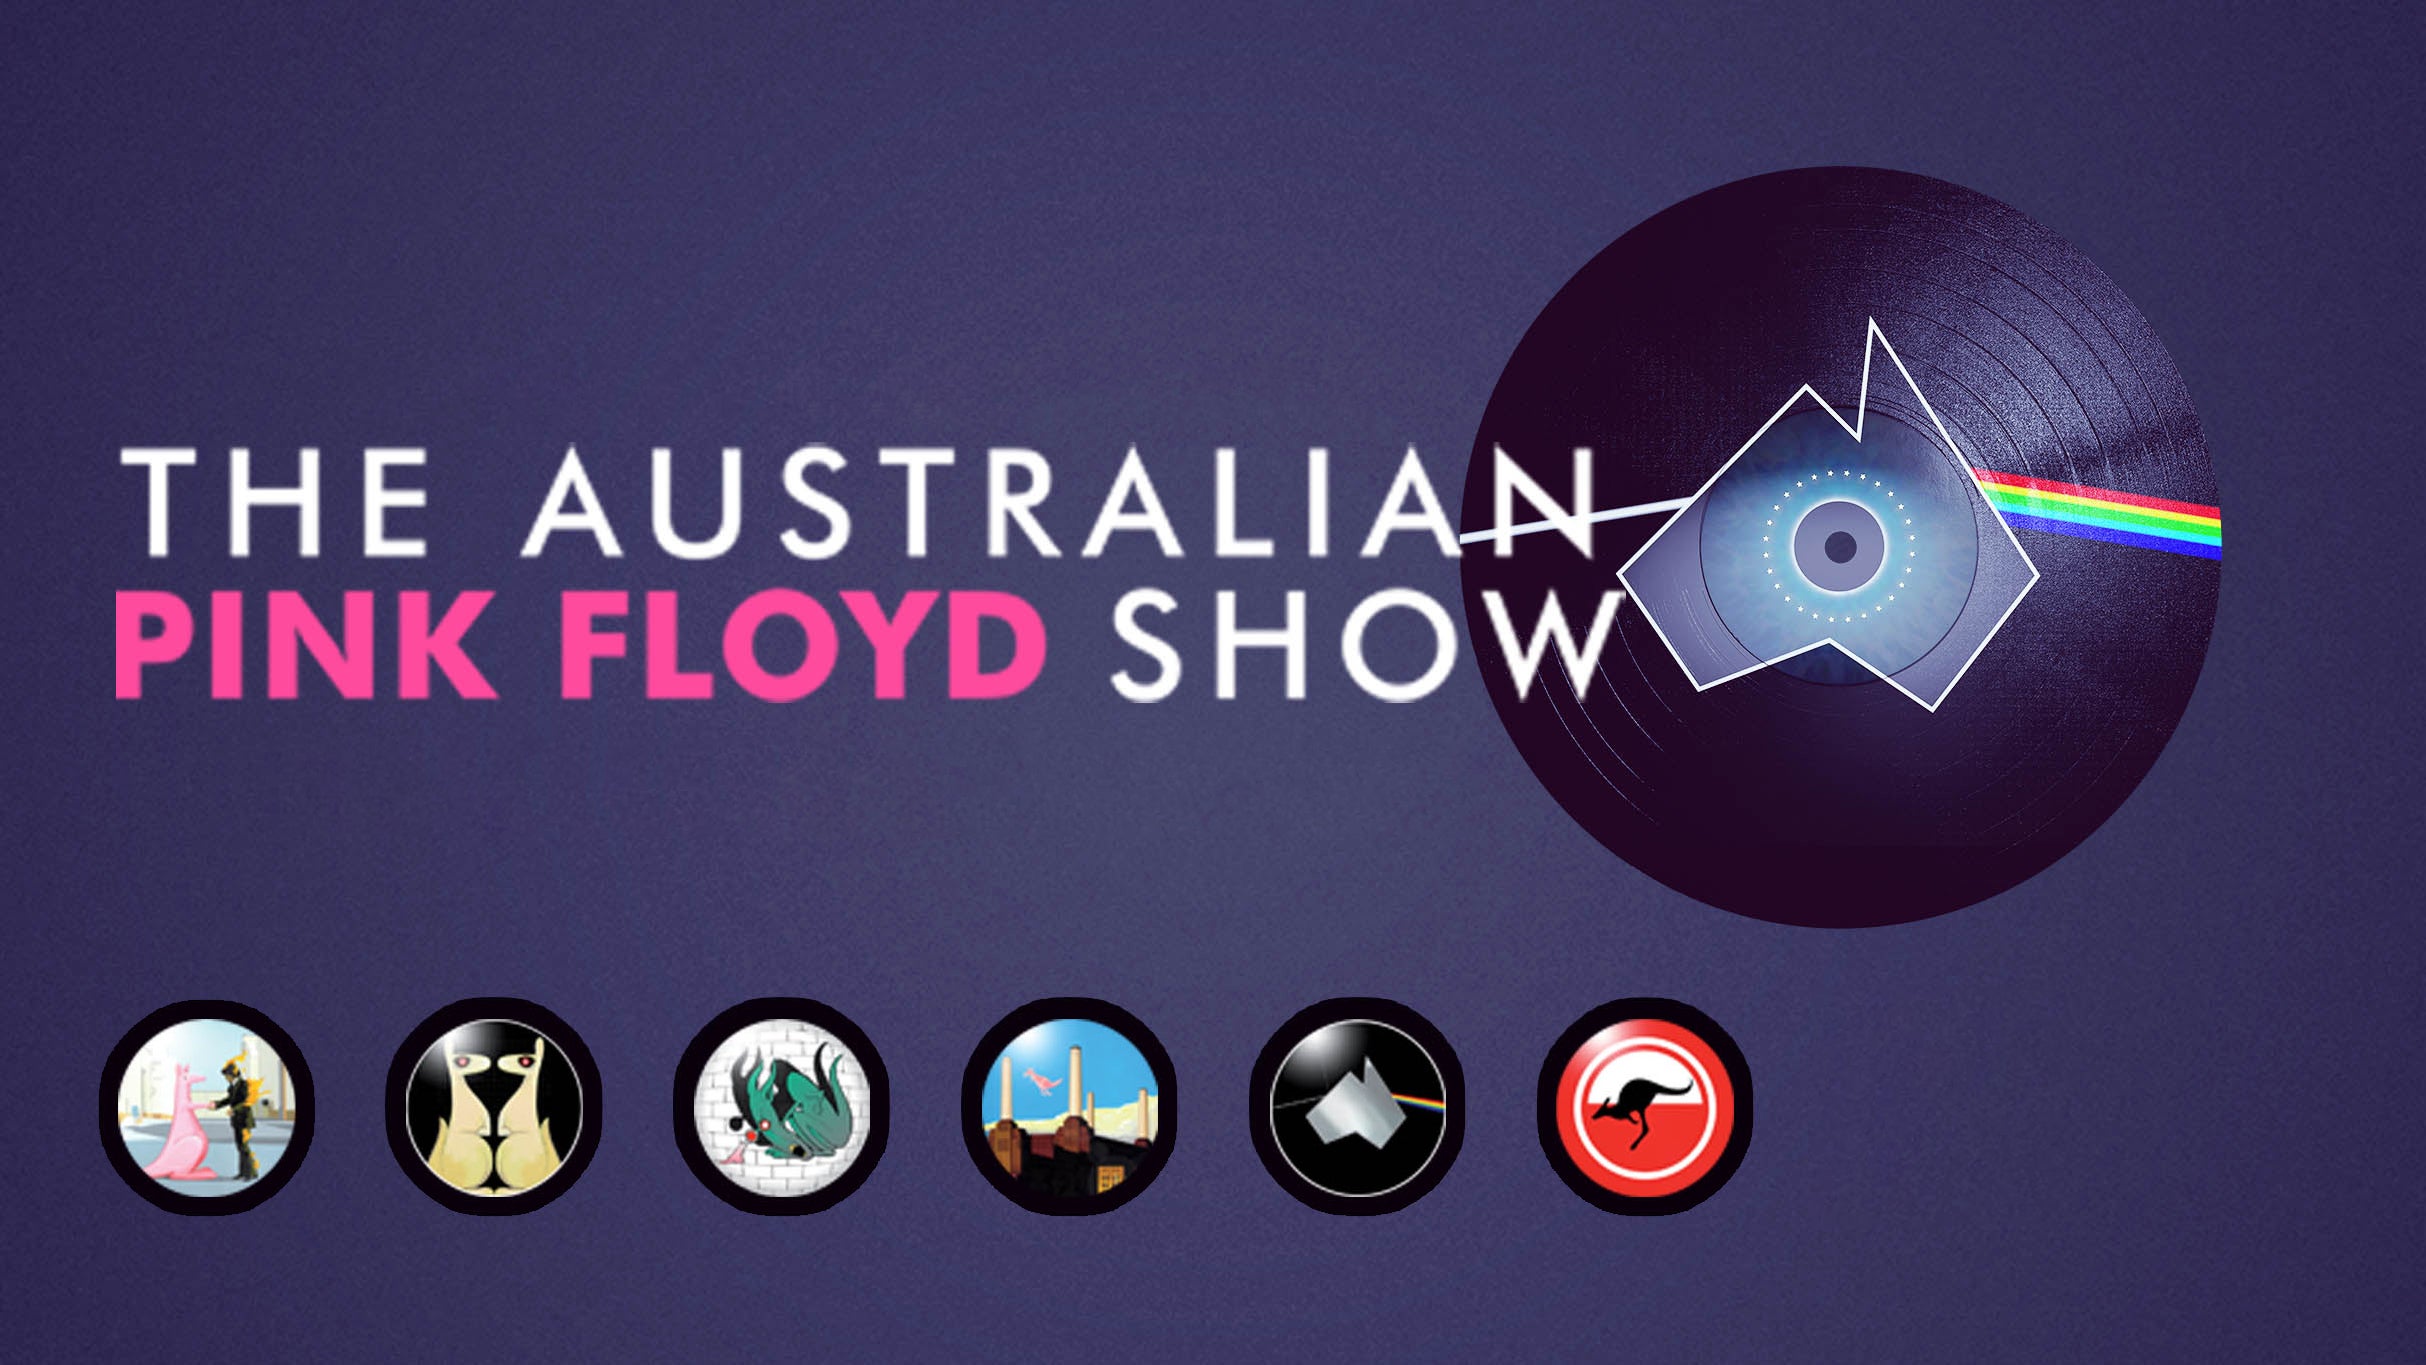 The Australian Pink Floyd Show free presale listing for concert tickets in Los Angeles, CA (Orpheum Theatre)